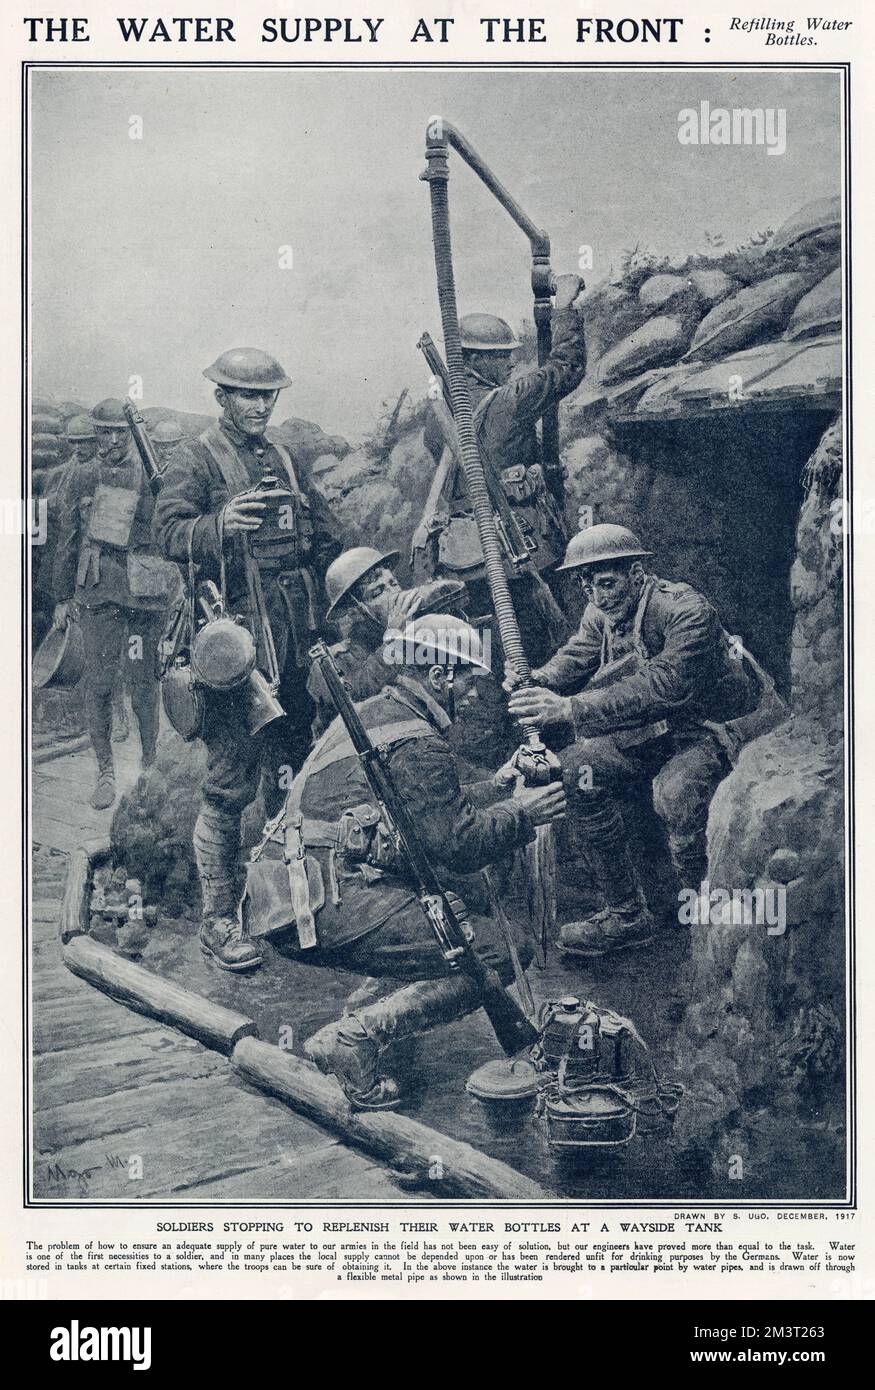 Soldiers stopping to replenish their water bottles, this could be filled at certain fixed stations brought in by flexible pipes. Stock Photo